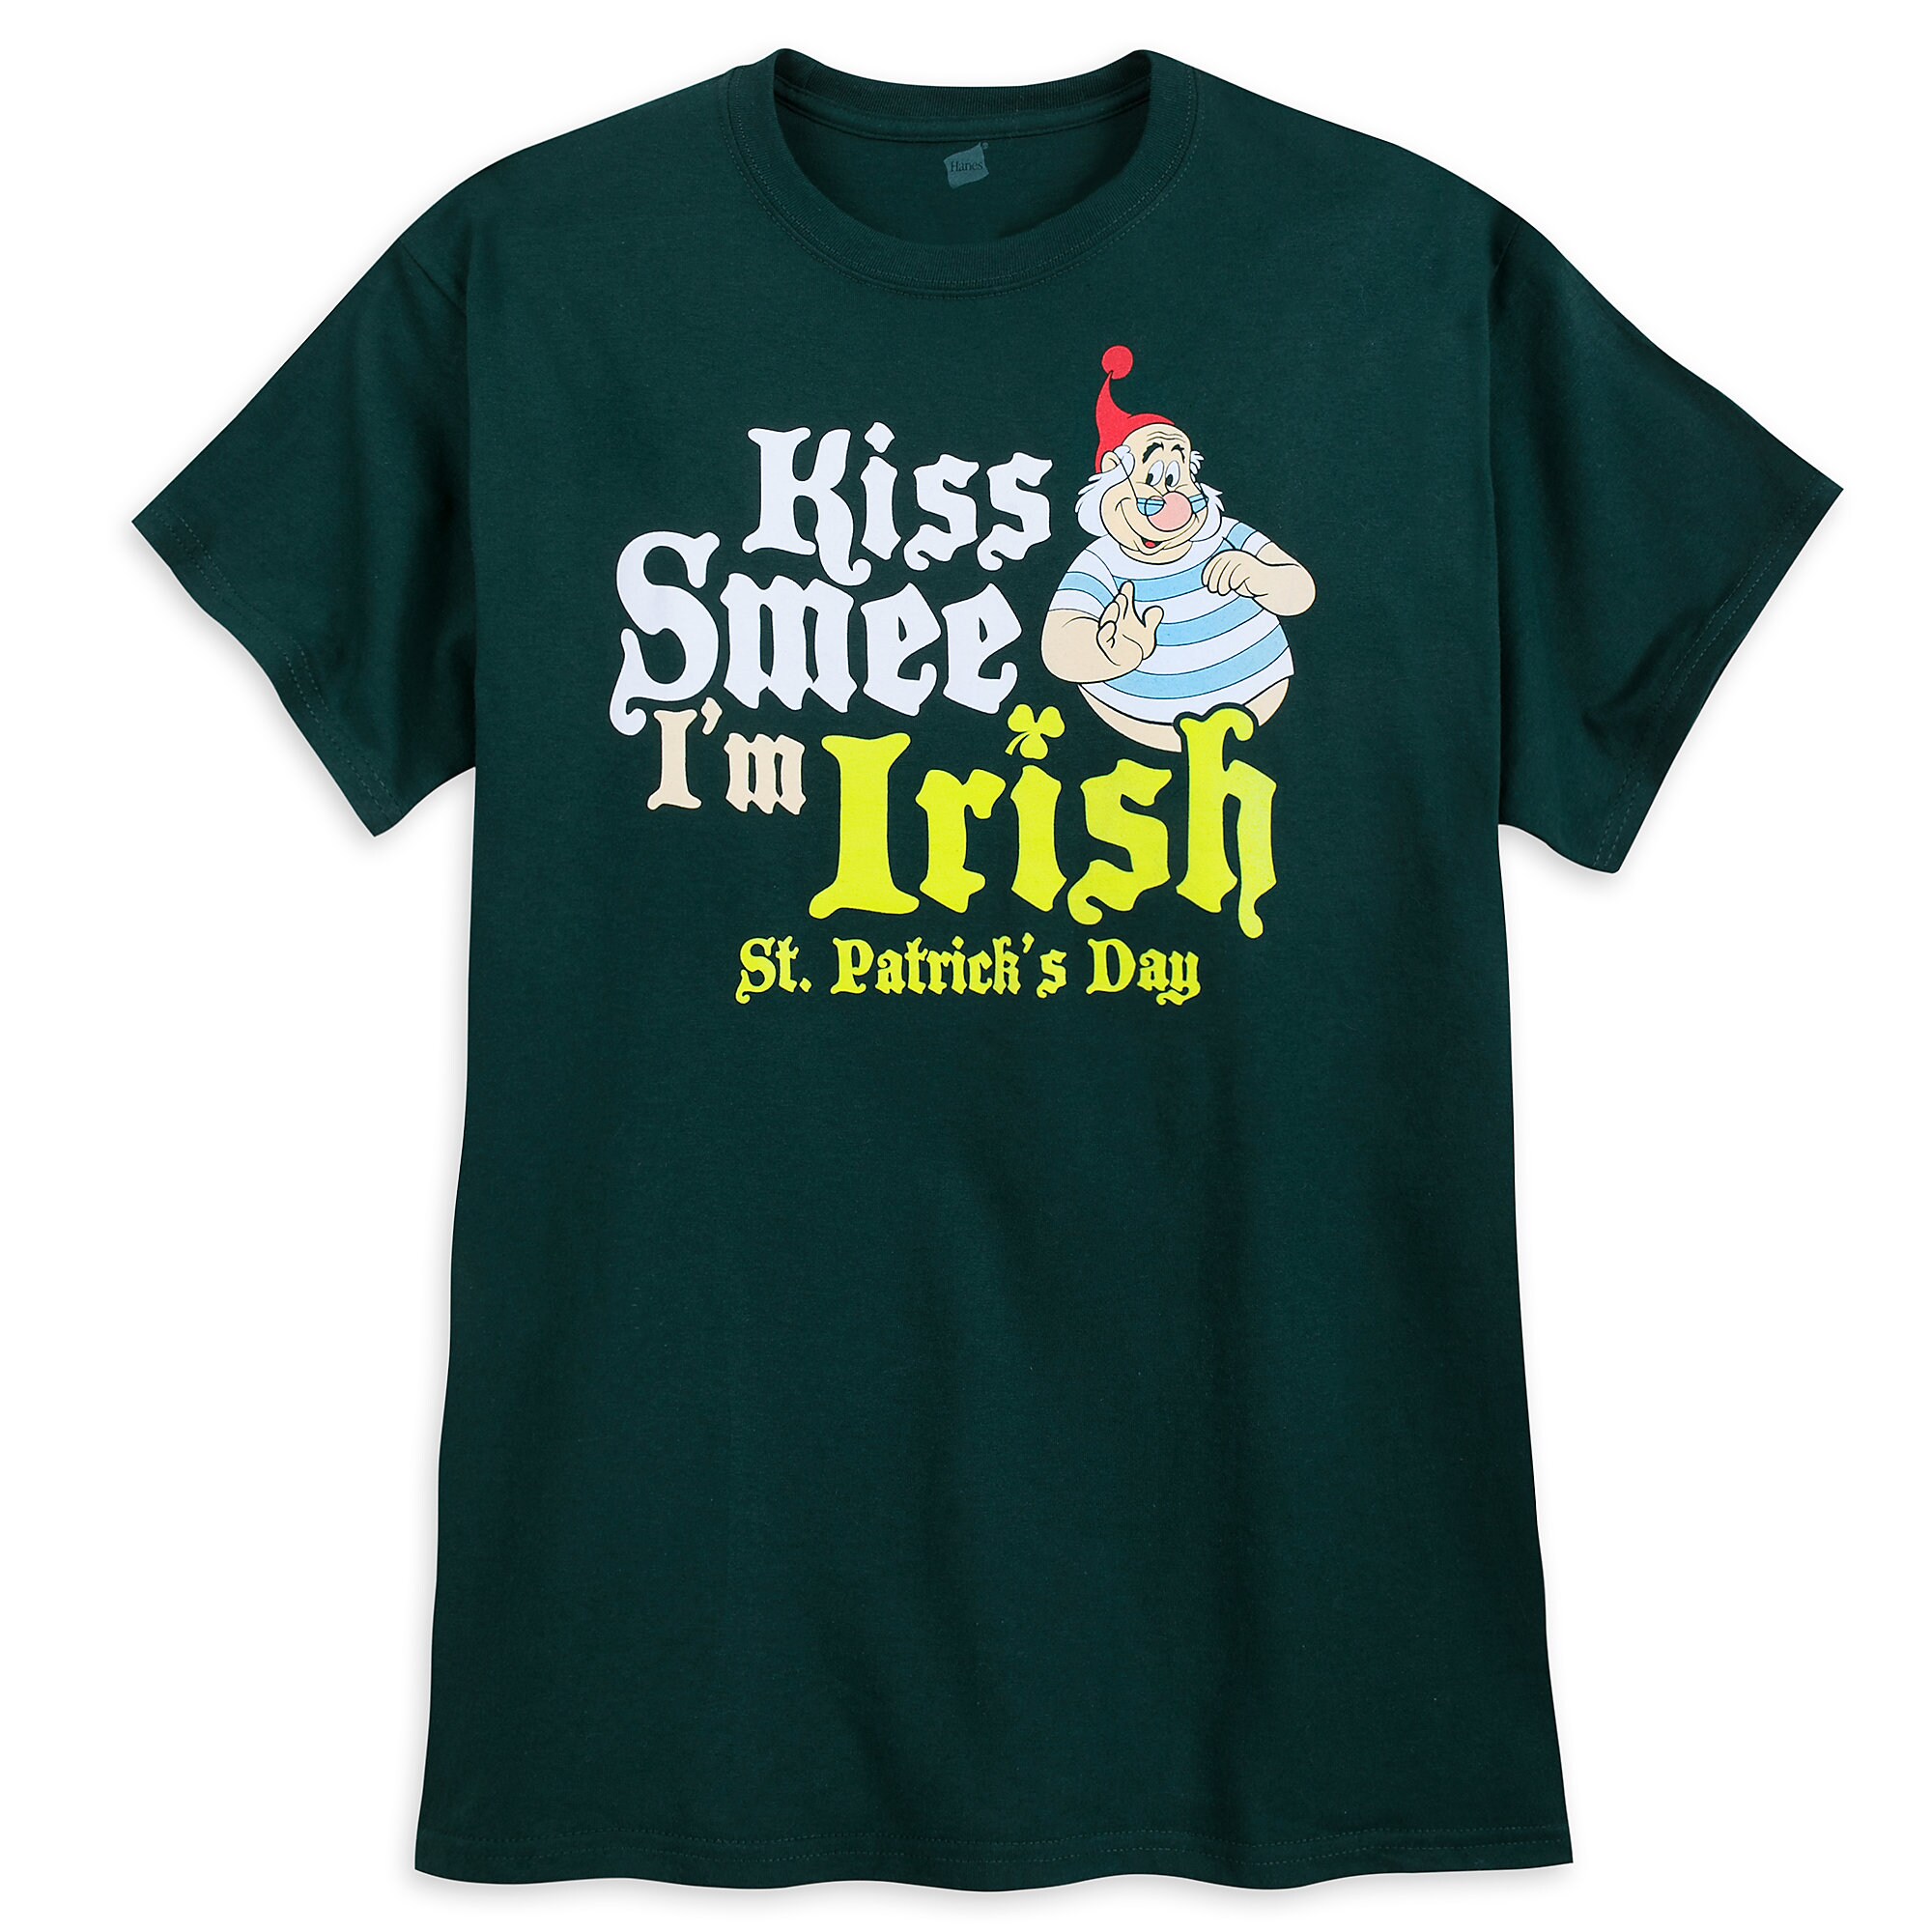 Mr. Smee T-Shirt for Men - Peter Pan - St. Patrick's Day